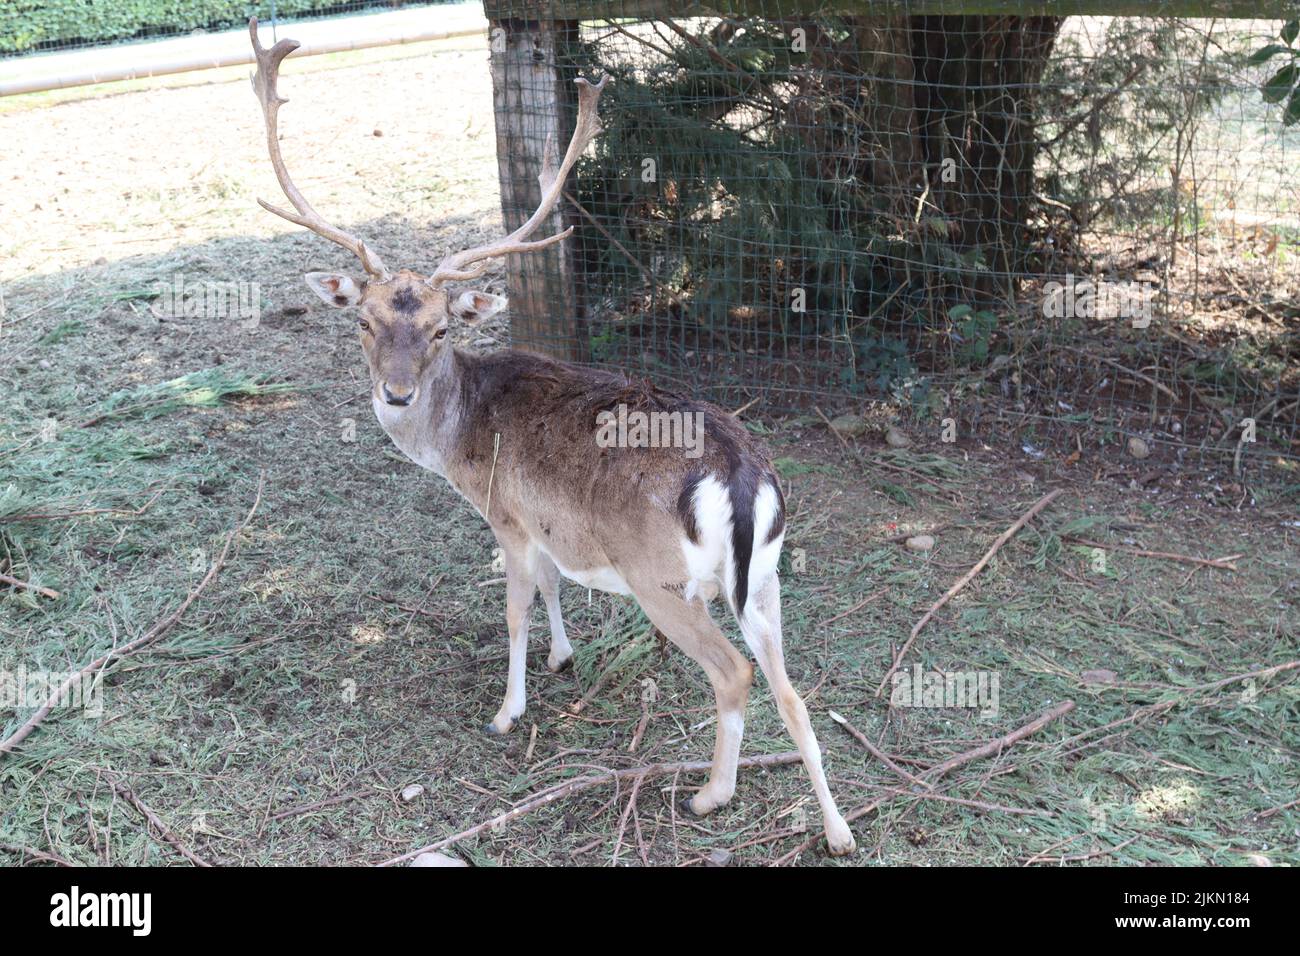 herd of fallow deer grazing in a private enclosure Stock Photo